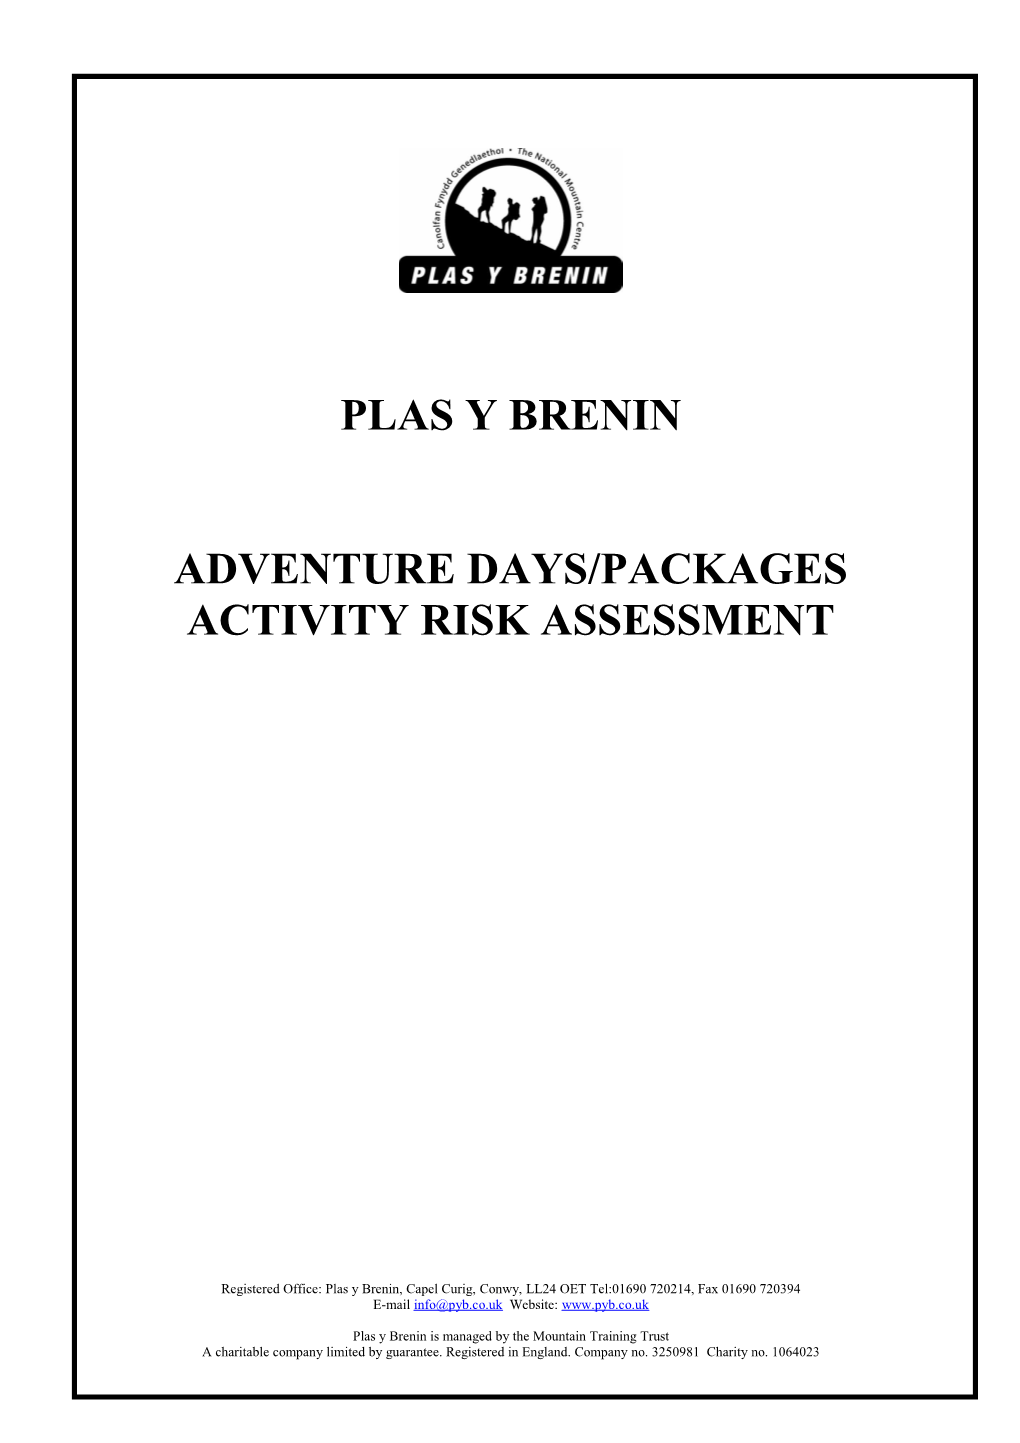 Adventure Days/Packages